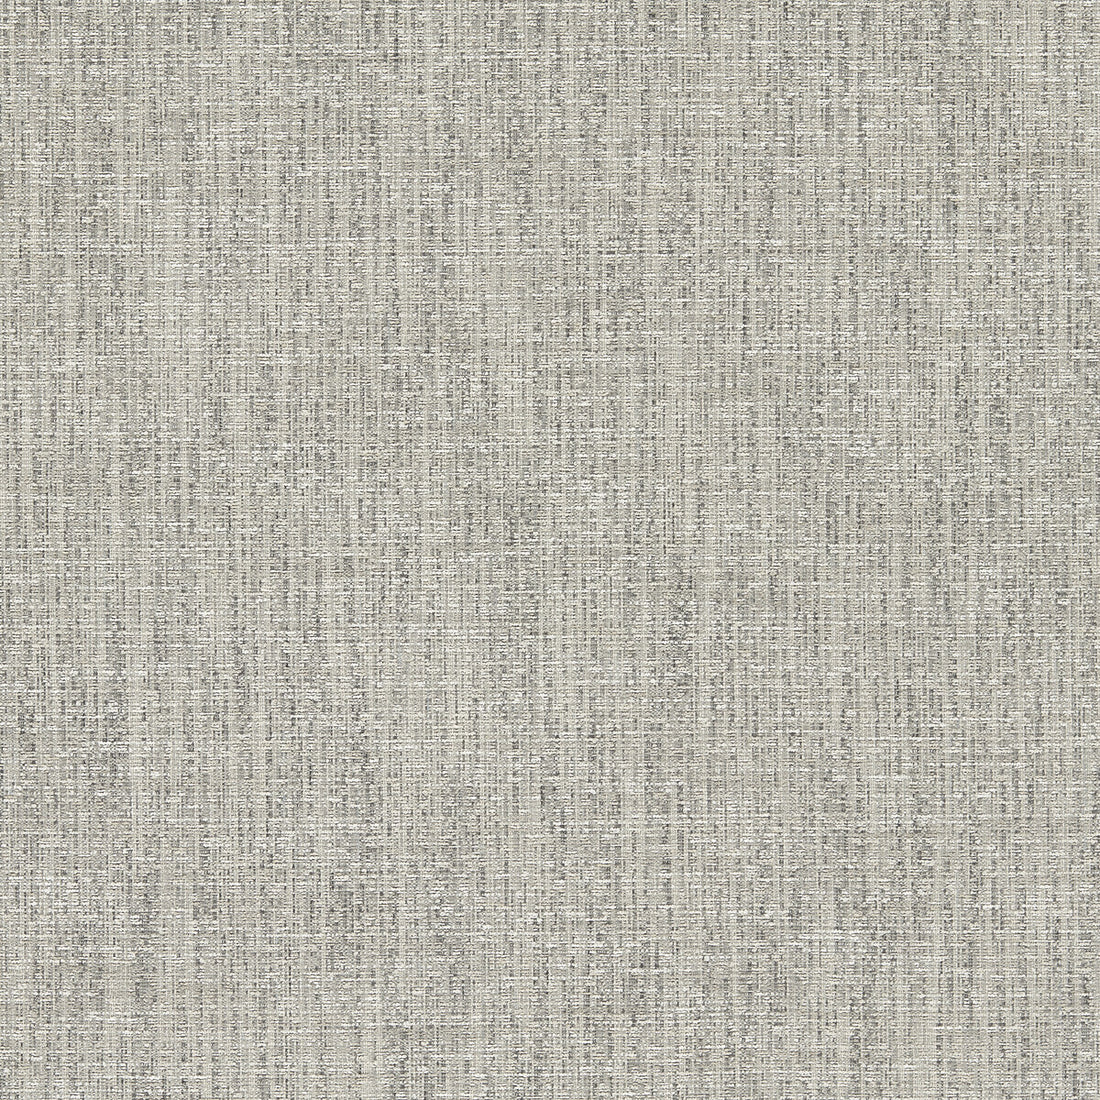 Cetara fabric in stone color - pattern F1642/18.CAC.0 - by Clarke And Clarke in the Cetara collection